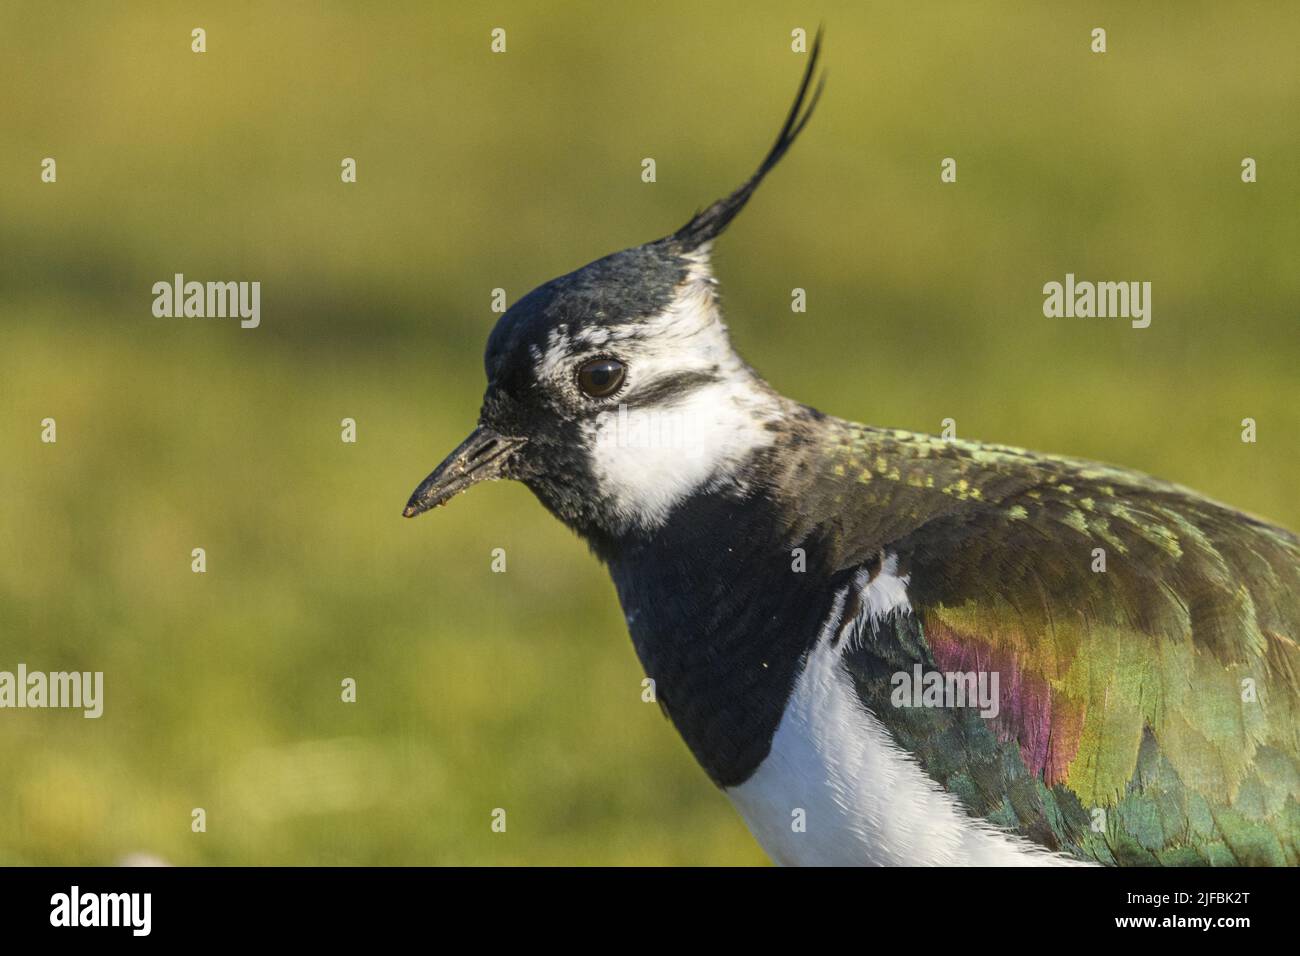 France, Somme, Baie de Somme, Cayeux-sur-mer, Ault, Le Hâble d'Ault, in spring the Northern Lapwing (Vanellus vanellus) feeds and nests in the gravelly lawns of the hâble dotted with pebbles Stock Photo